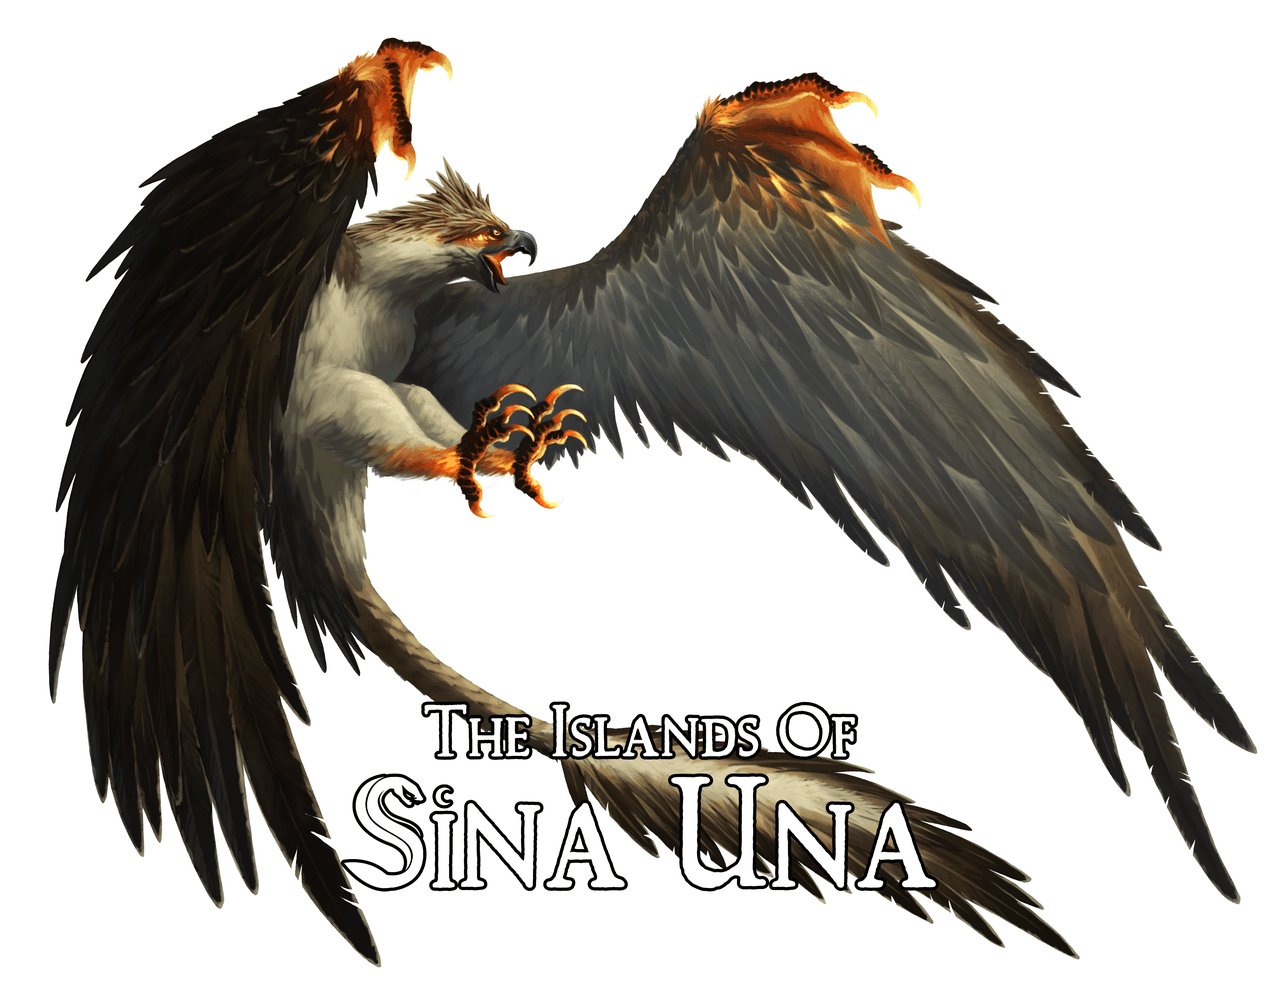 The Islands of Sina Una Hardcover Campaign Book - Gaming Library